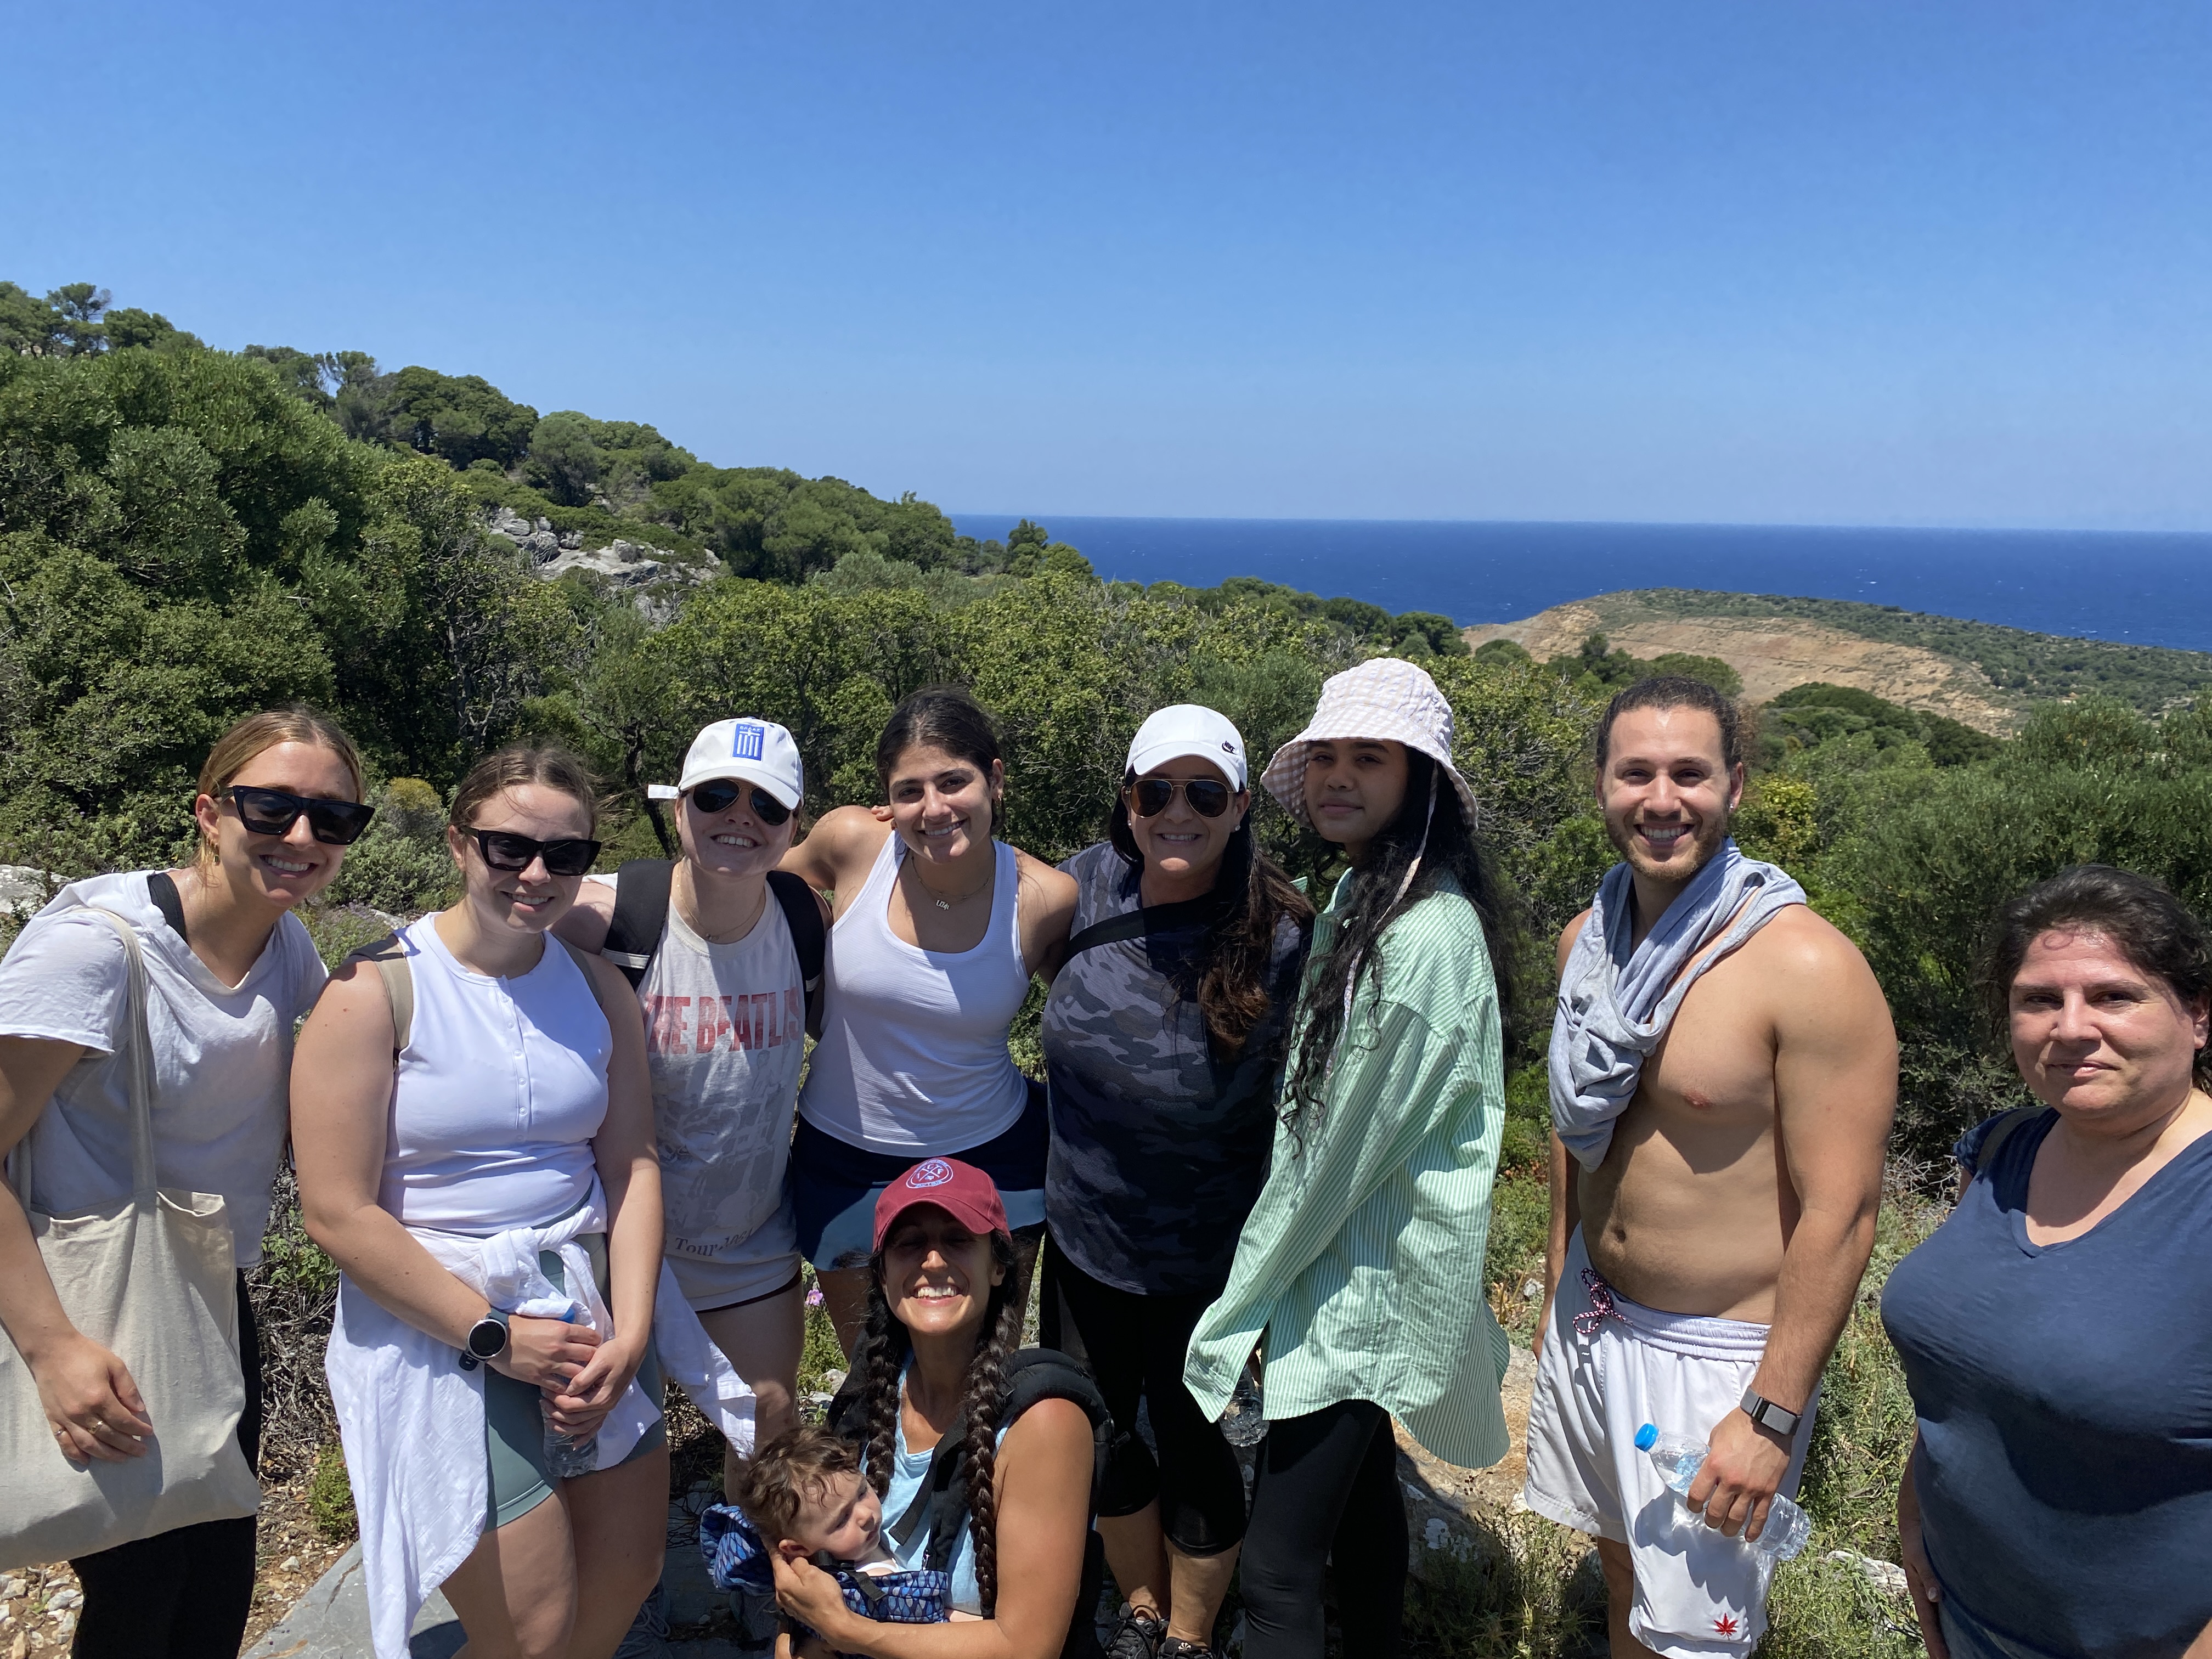 Nutrition sciences and nursing students standing on a mountainside after a hike.